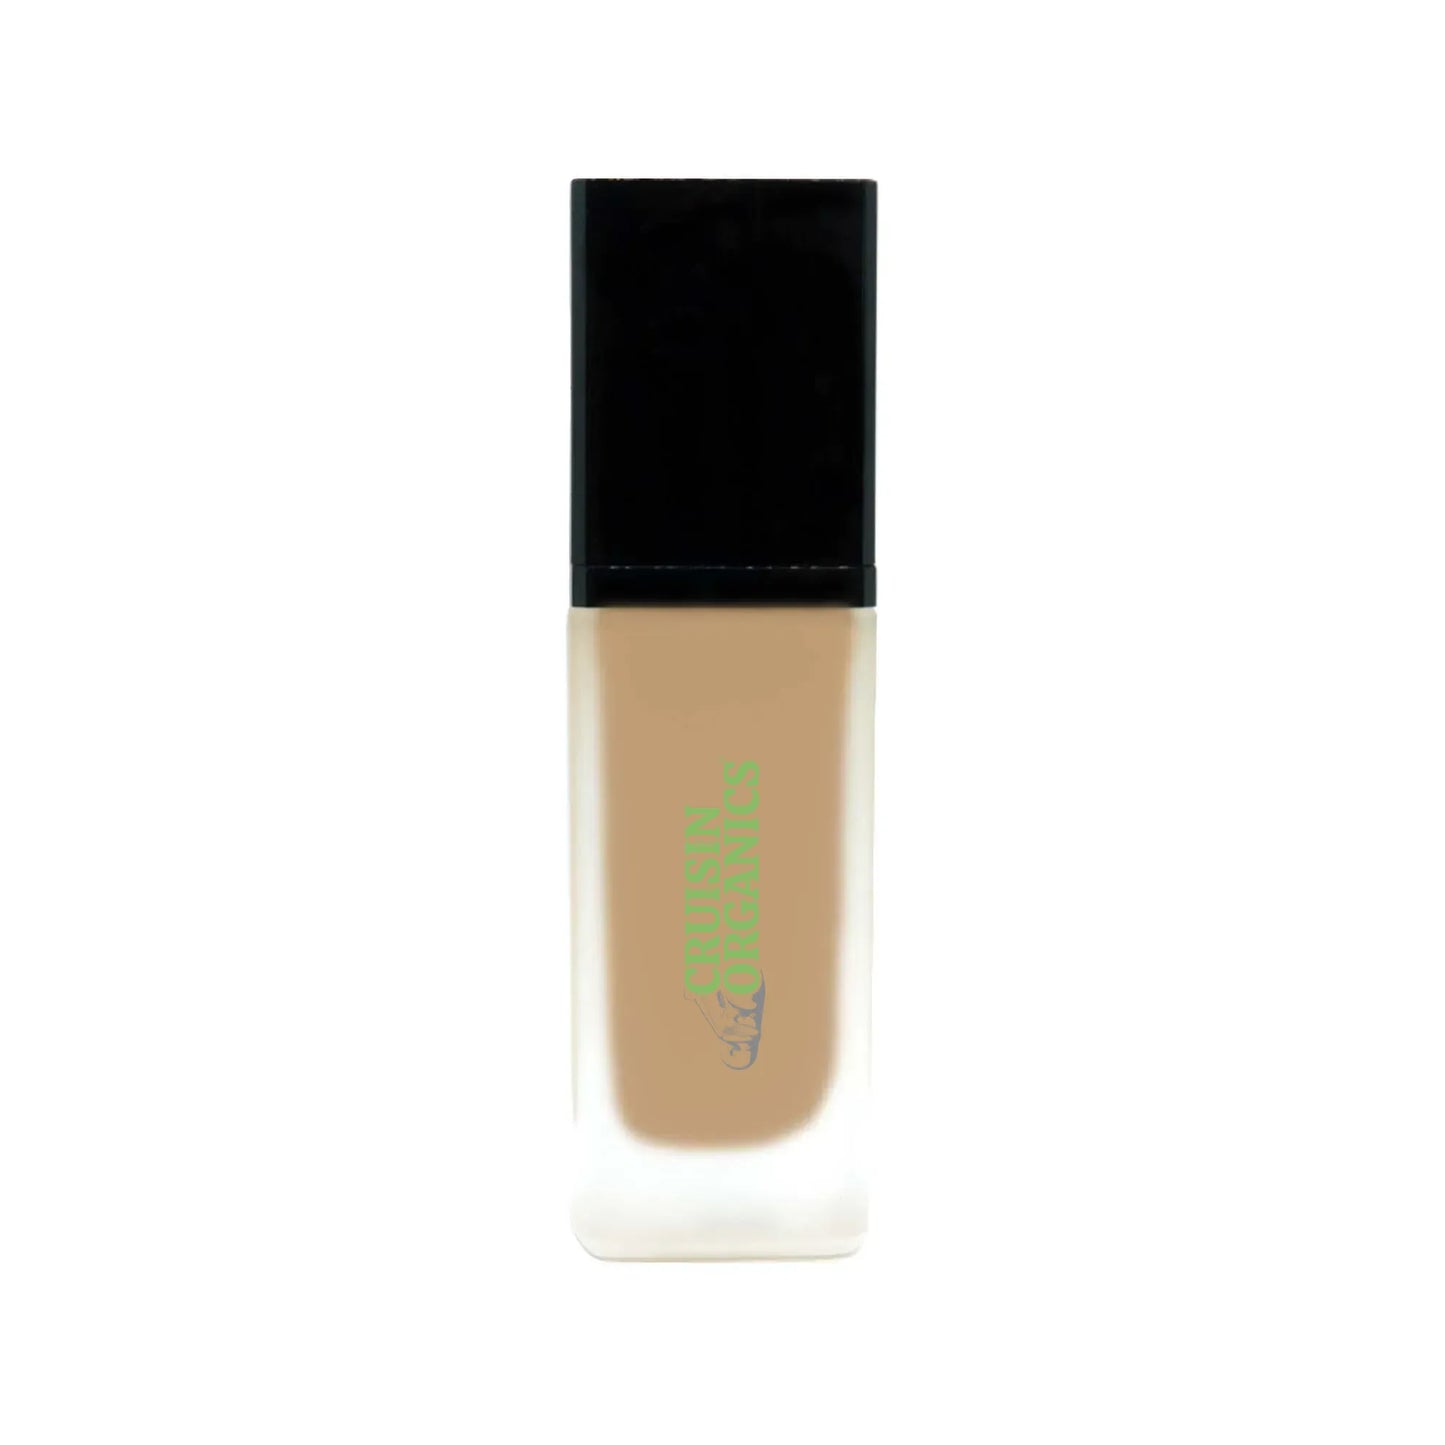 Cruisin Organics Spiced Honey Foundation with SPF.  A level of medium to full modular coverage that preserves and beams the way we all crave to gleam and glimmer on every single day. It has a spicy kick to makeup. Additional SPF 15 is distributed to consumers in order to shield themselves from ultraviolet rays.